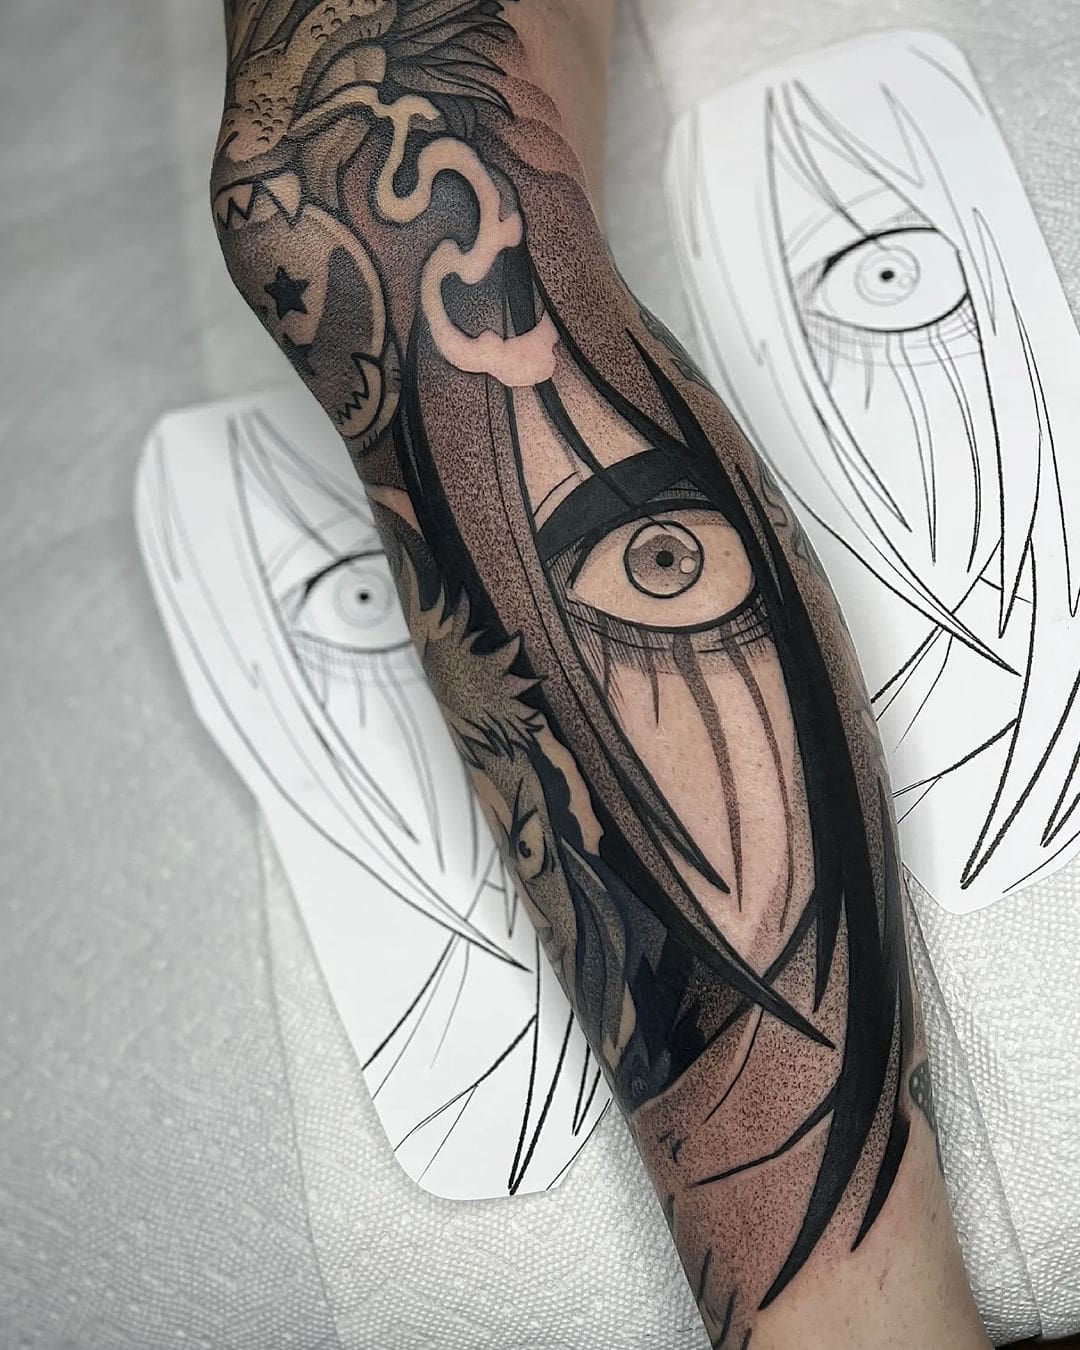 38 Attack On Titan Tattoos: A Tribute To The Titans And Humanity • Body Artifact